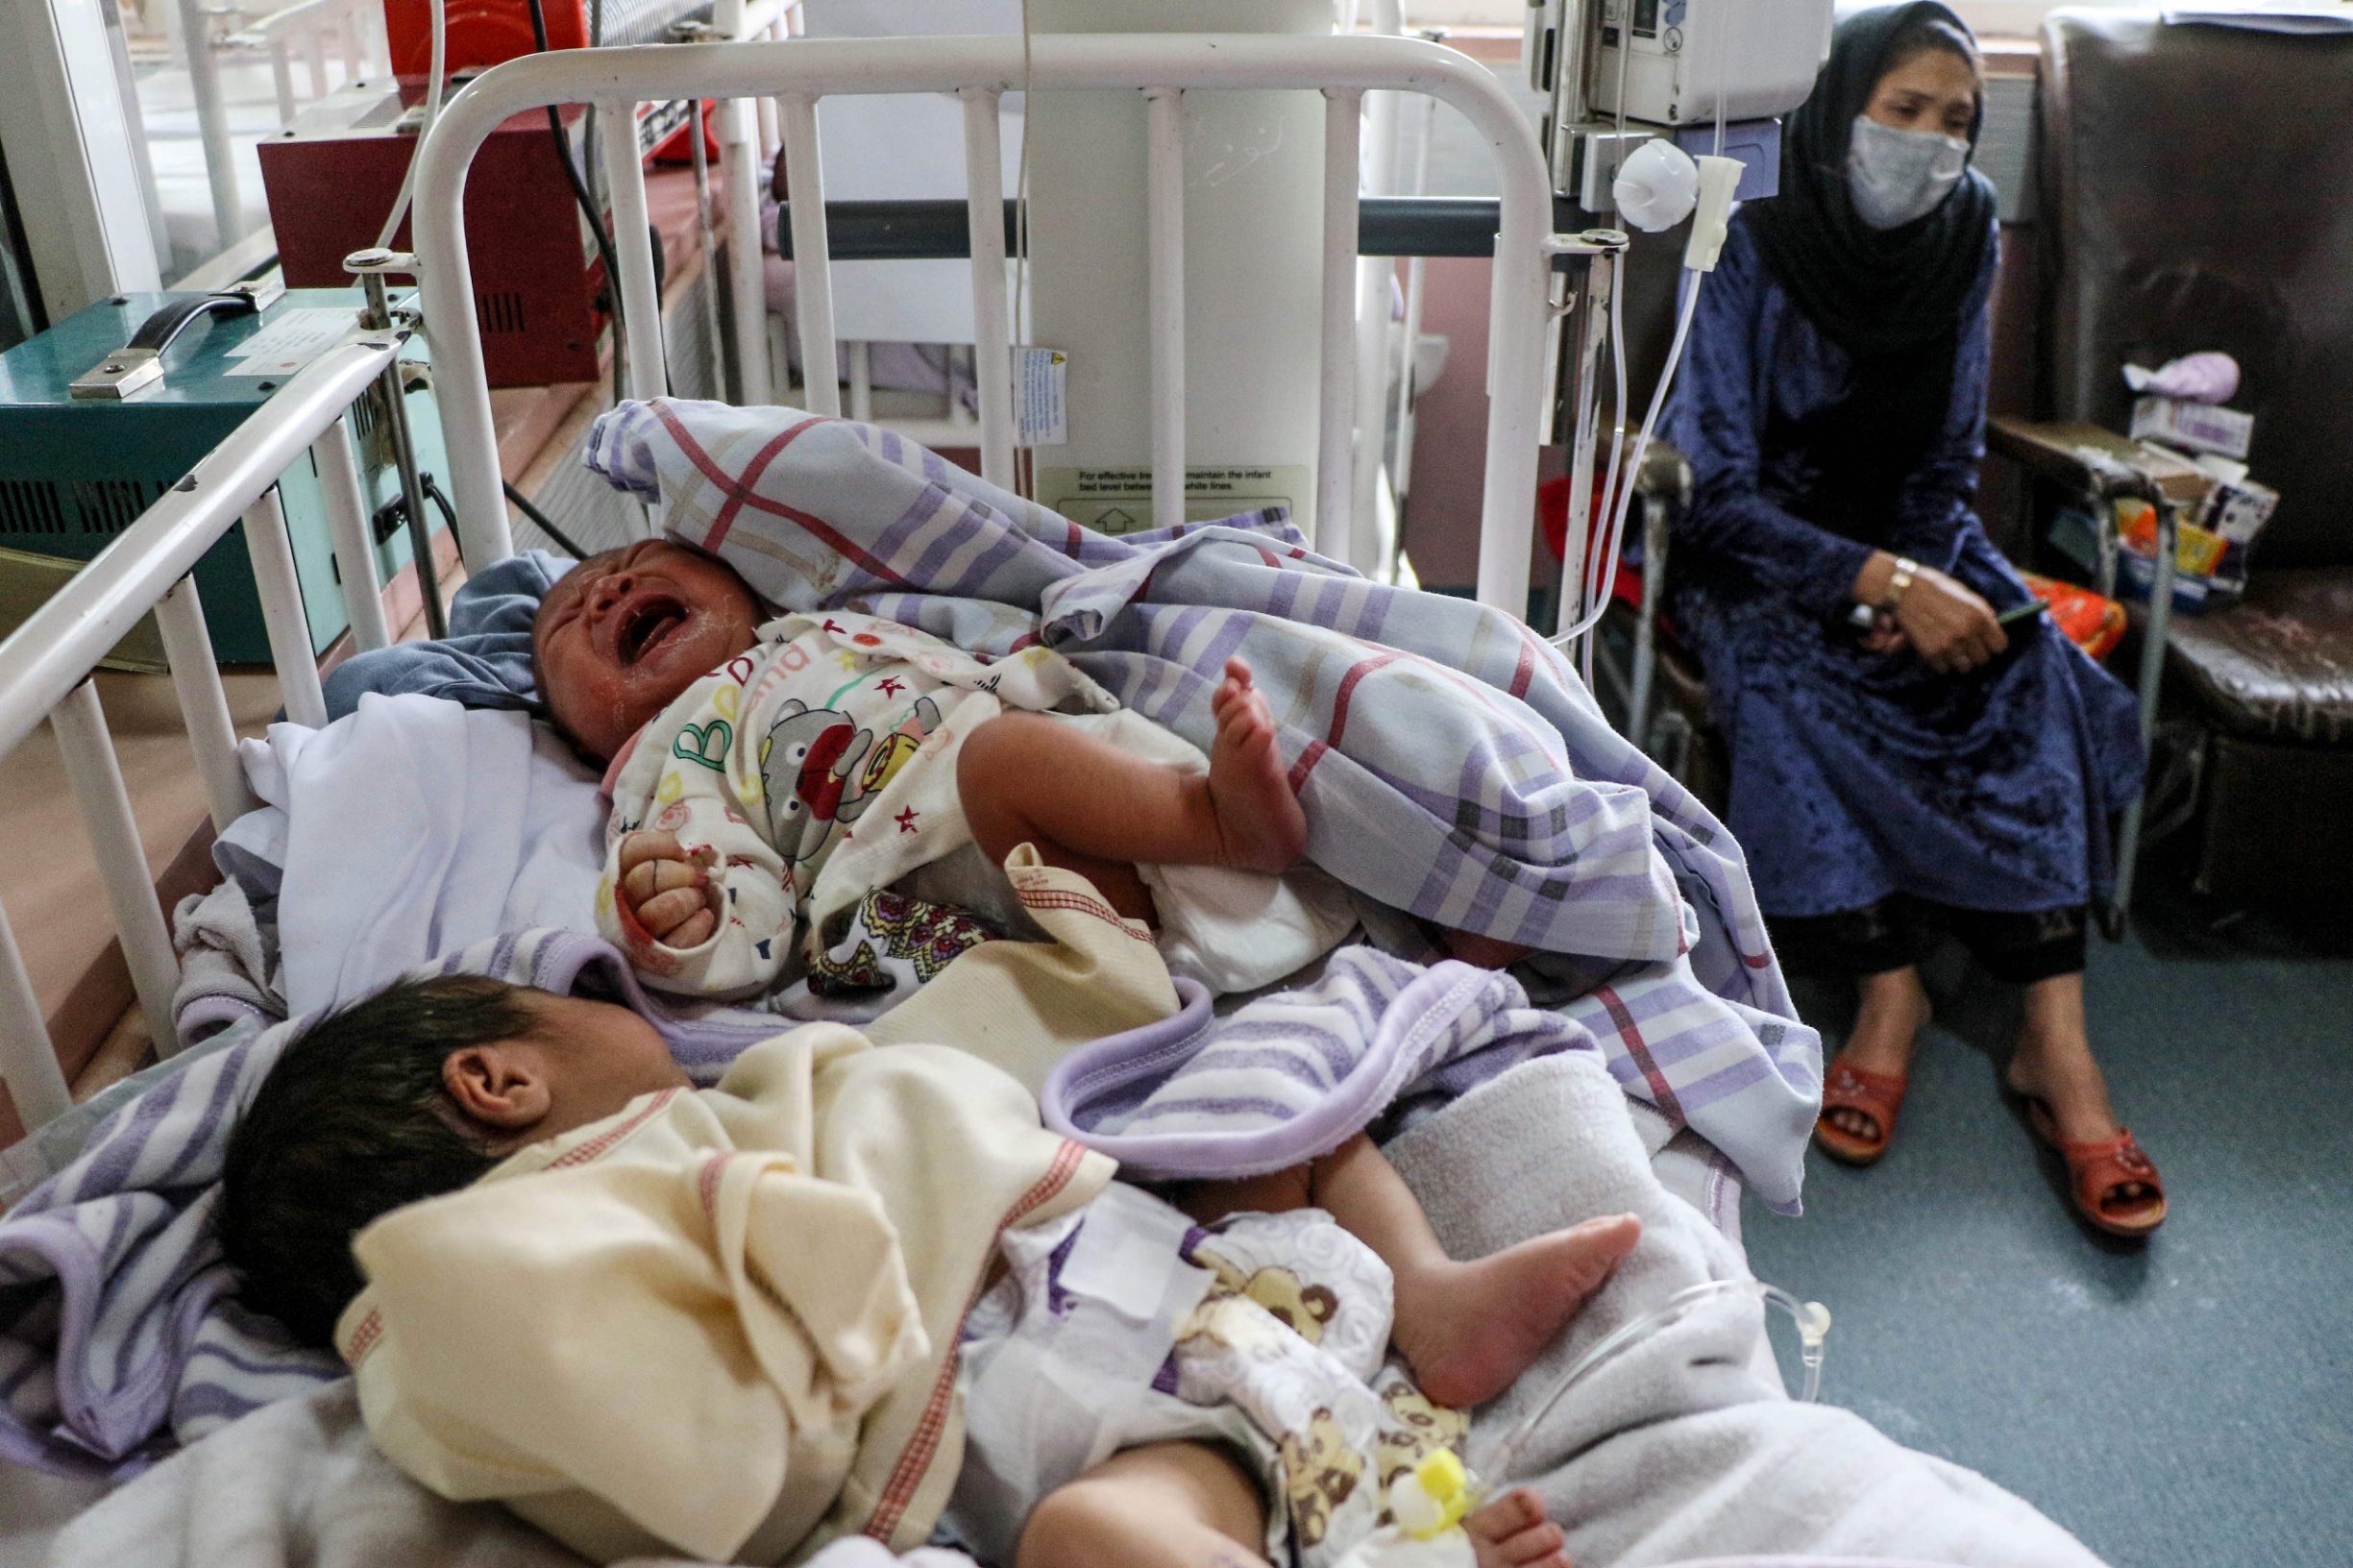 TOPSHOT - A woman (R) sits next to newborn babies who lost their mothers following a suicide attack in a maternity hospital, in Kabul on May 13, 2020. - The combined death toll from two attacks in Afghanistan, including one on a hospital in which infants and nurses were killed, has risen to 56, health officials said May 13. Three gunmen stormed a Kabul maternity hospital on May 12 as parents brought infants and children for appointments. (Photo by STR / AFP)